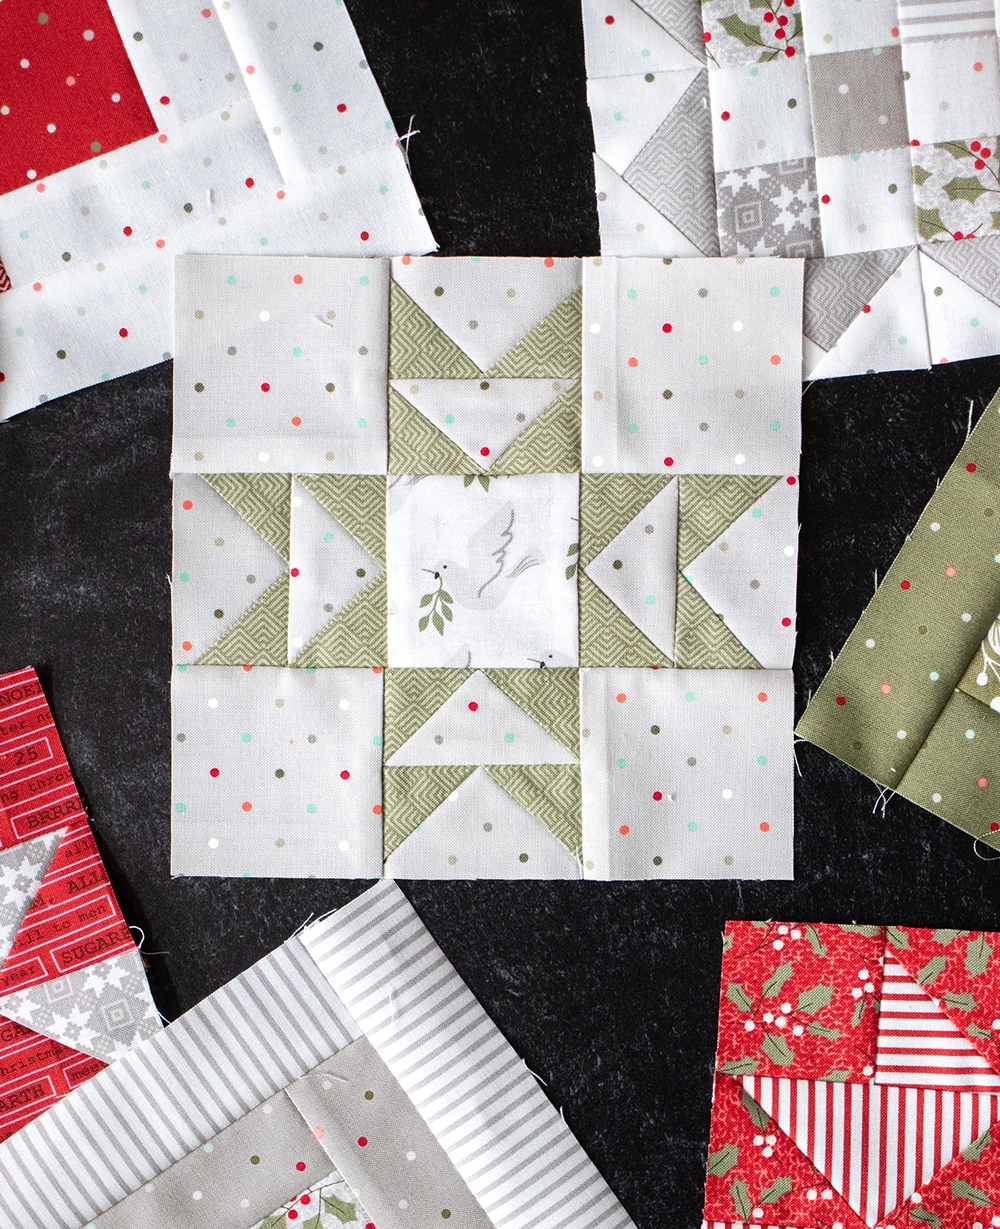 Sewcialites Quilt Along: Free Block of the Week by Fat Quarter Shop. Block 25 is "Virtue" by Bonnie Olaveson of Cotton Way. Fabric is Christmas Morning by Lella Boutique for Moda Fabrics.